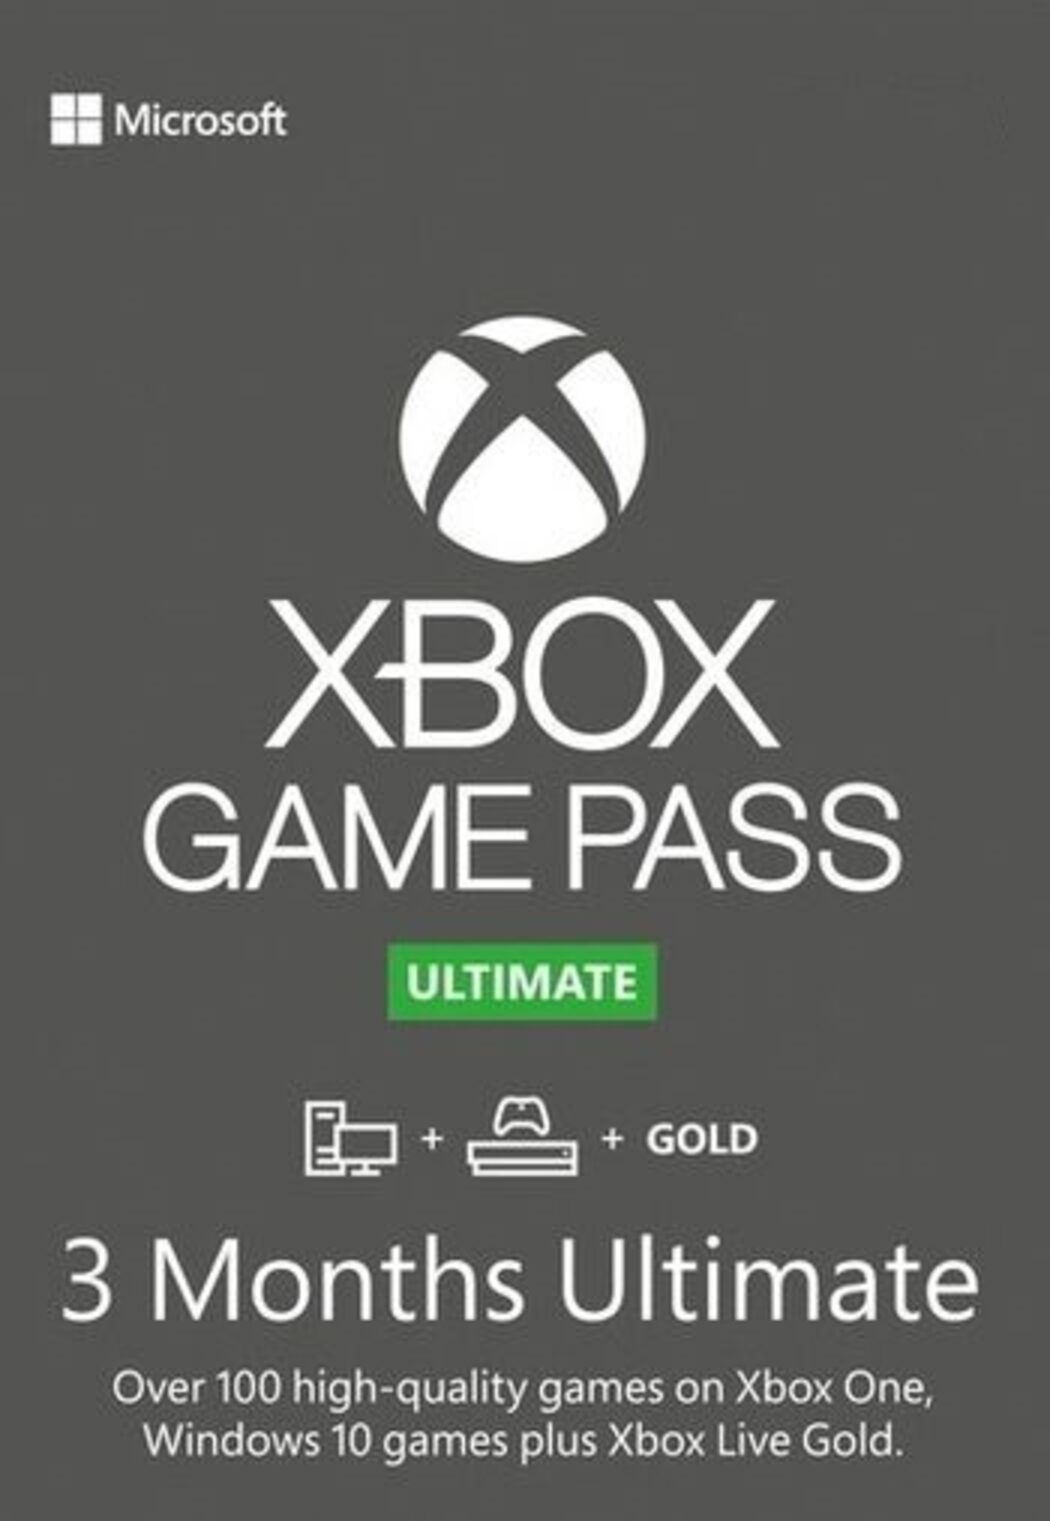 Xbox Game Pass Ultimate at the best price